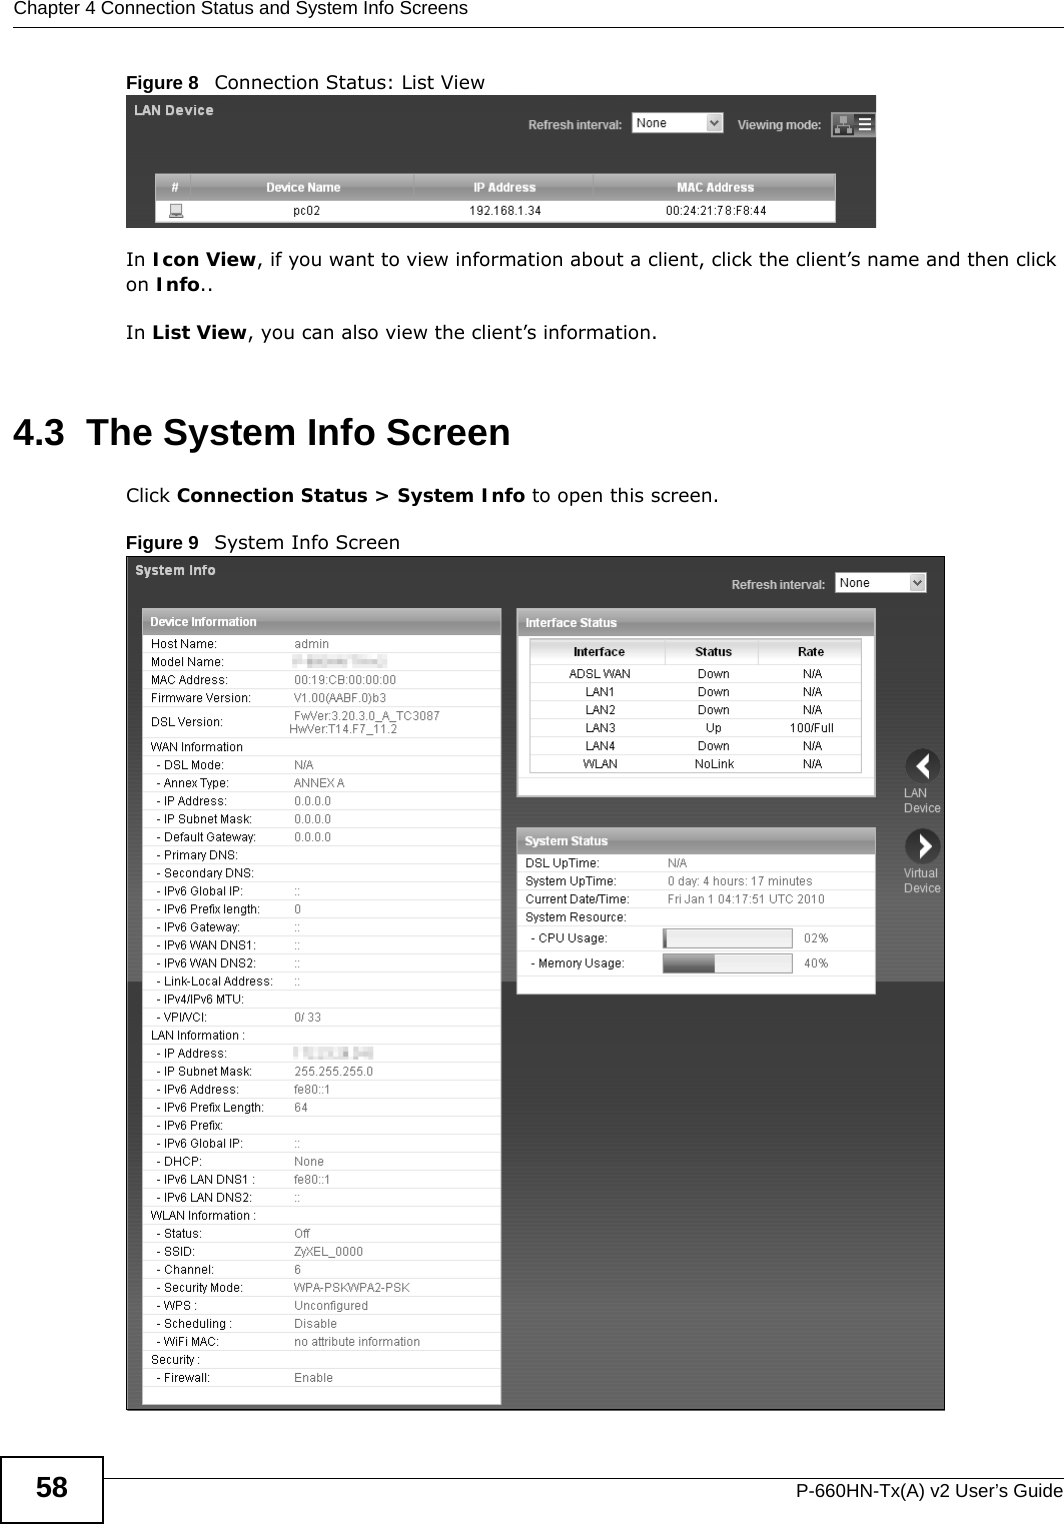 Chapter 4 Connection Status and System Info ScreensP-660HN-Tx(A) v2 User’s Guide58Figure 8   Connection Status: List ViewIn Icon View, if you want to view information about a client, click the client’s name and then click on Info.. In List View, you can also view the client’s information.4.3  The System Info ScreenClick Connection Status &gt; System Info to open this screen. Figure 9   System Info Screen 